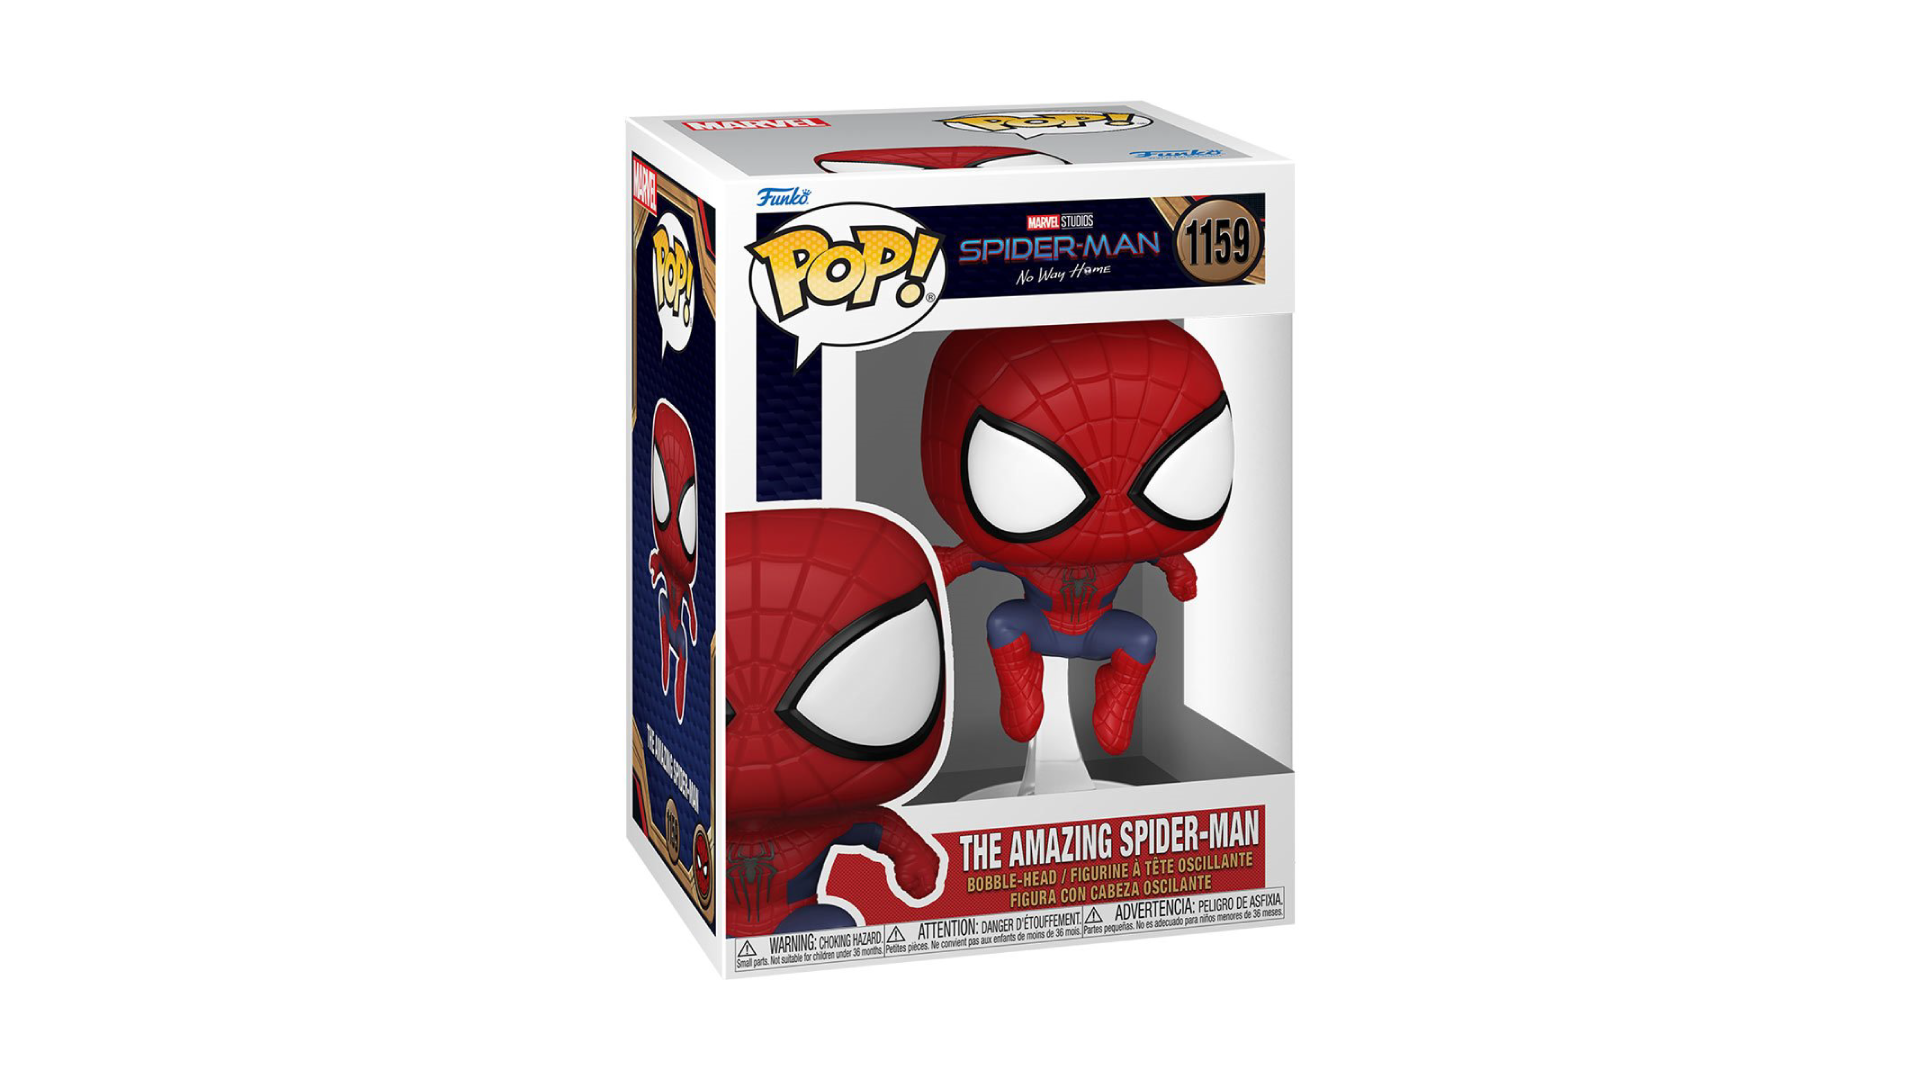 Funko Pop Marvel Spider-Man No Way Home The Amazing Spider-Man Leaping 1159